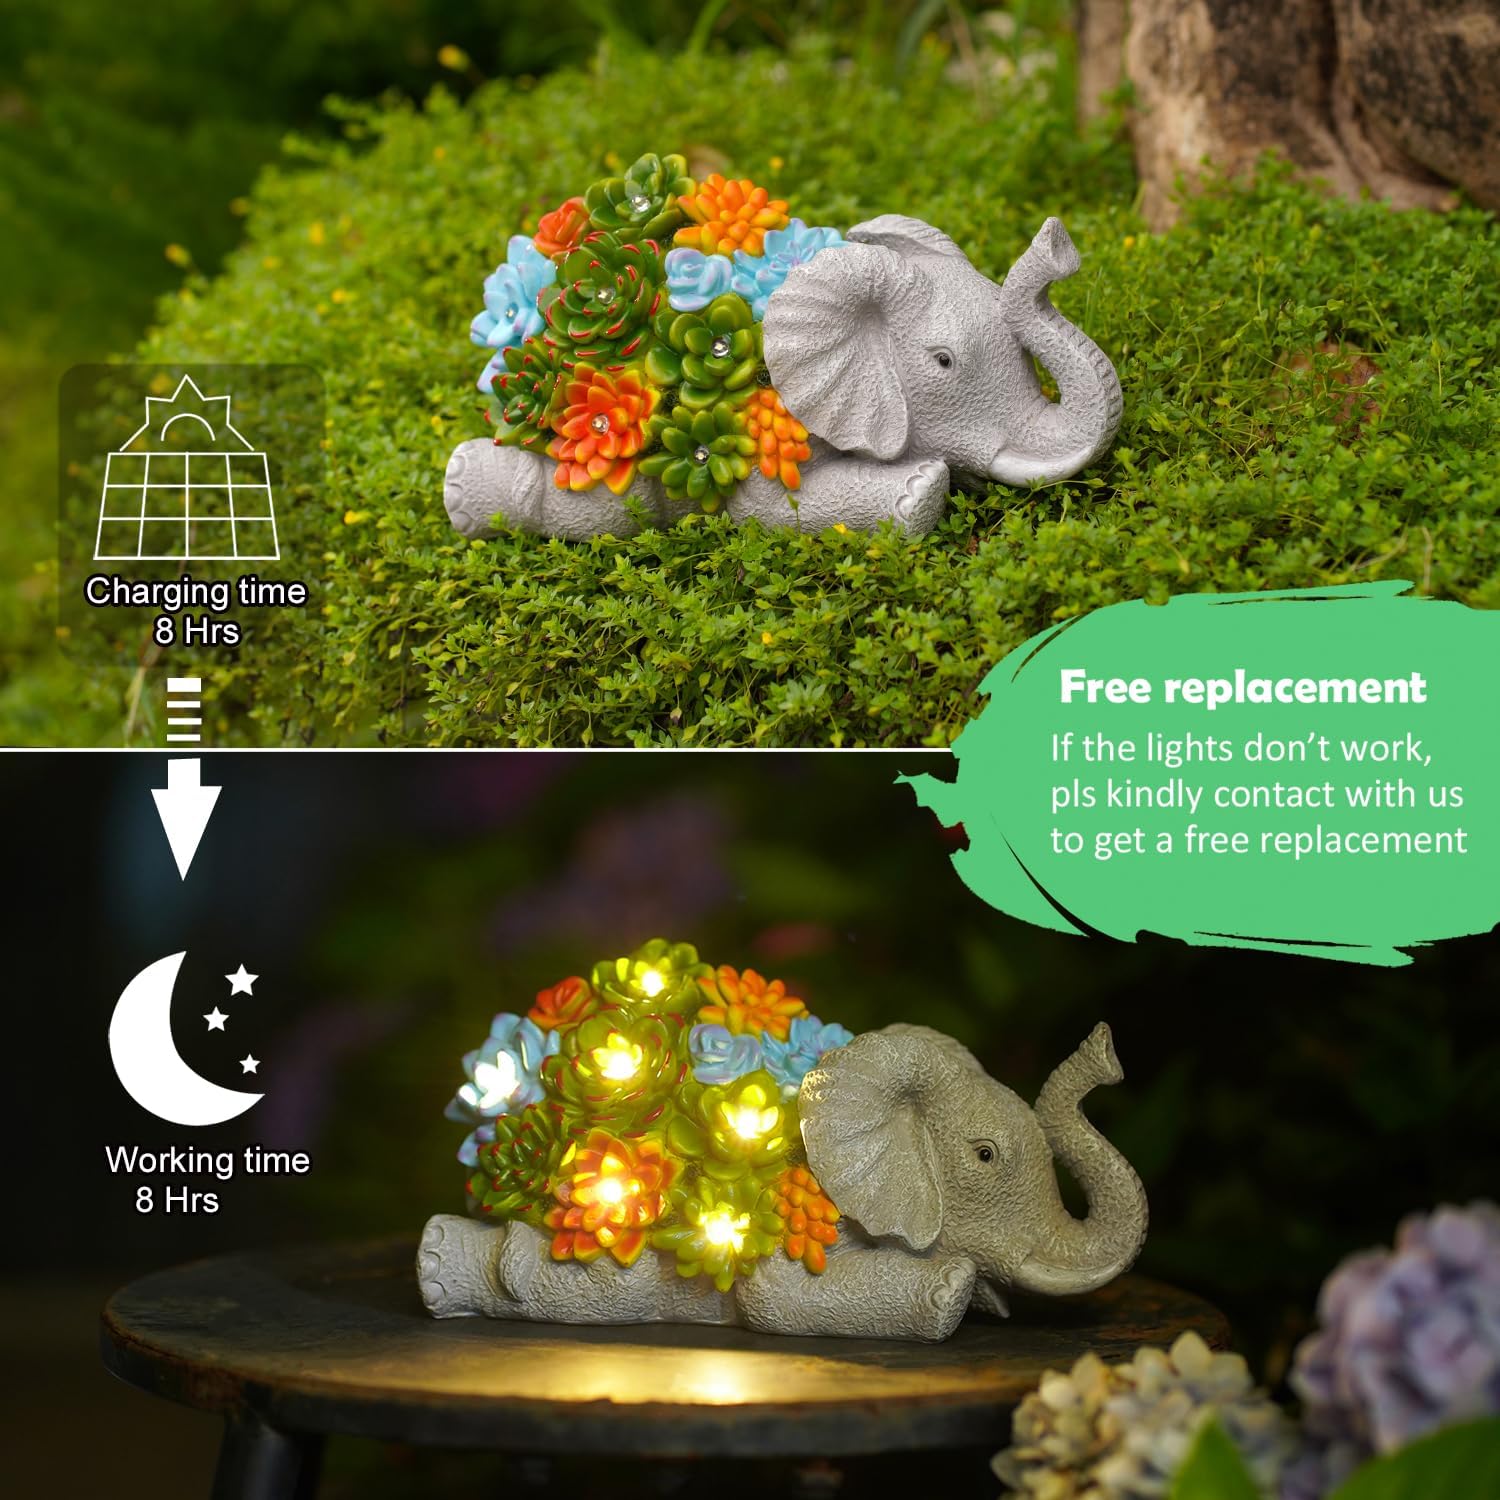 Elephant Statue Solar Garden Ornaments Outdoor Decor Waterproof Resin Elephant Figurines with Succulent 6 LED Solar Lights decoration for Home Yard Patio Lawn Elephant gifts for Women/Mum/Christmas 3